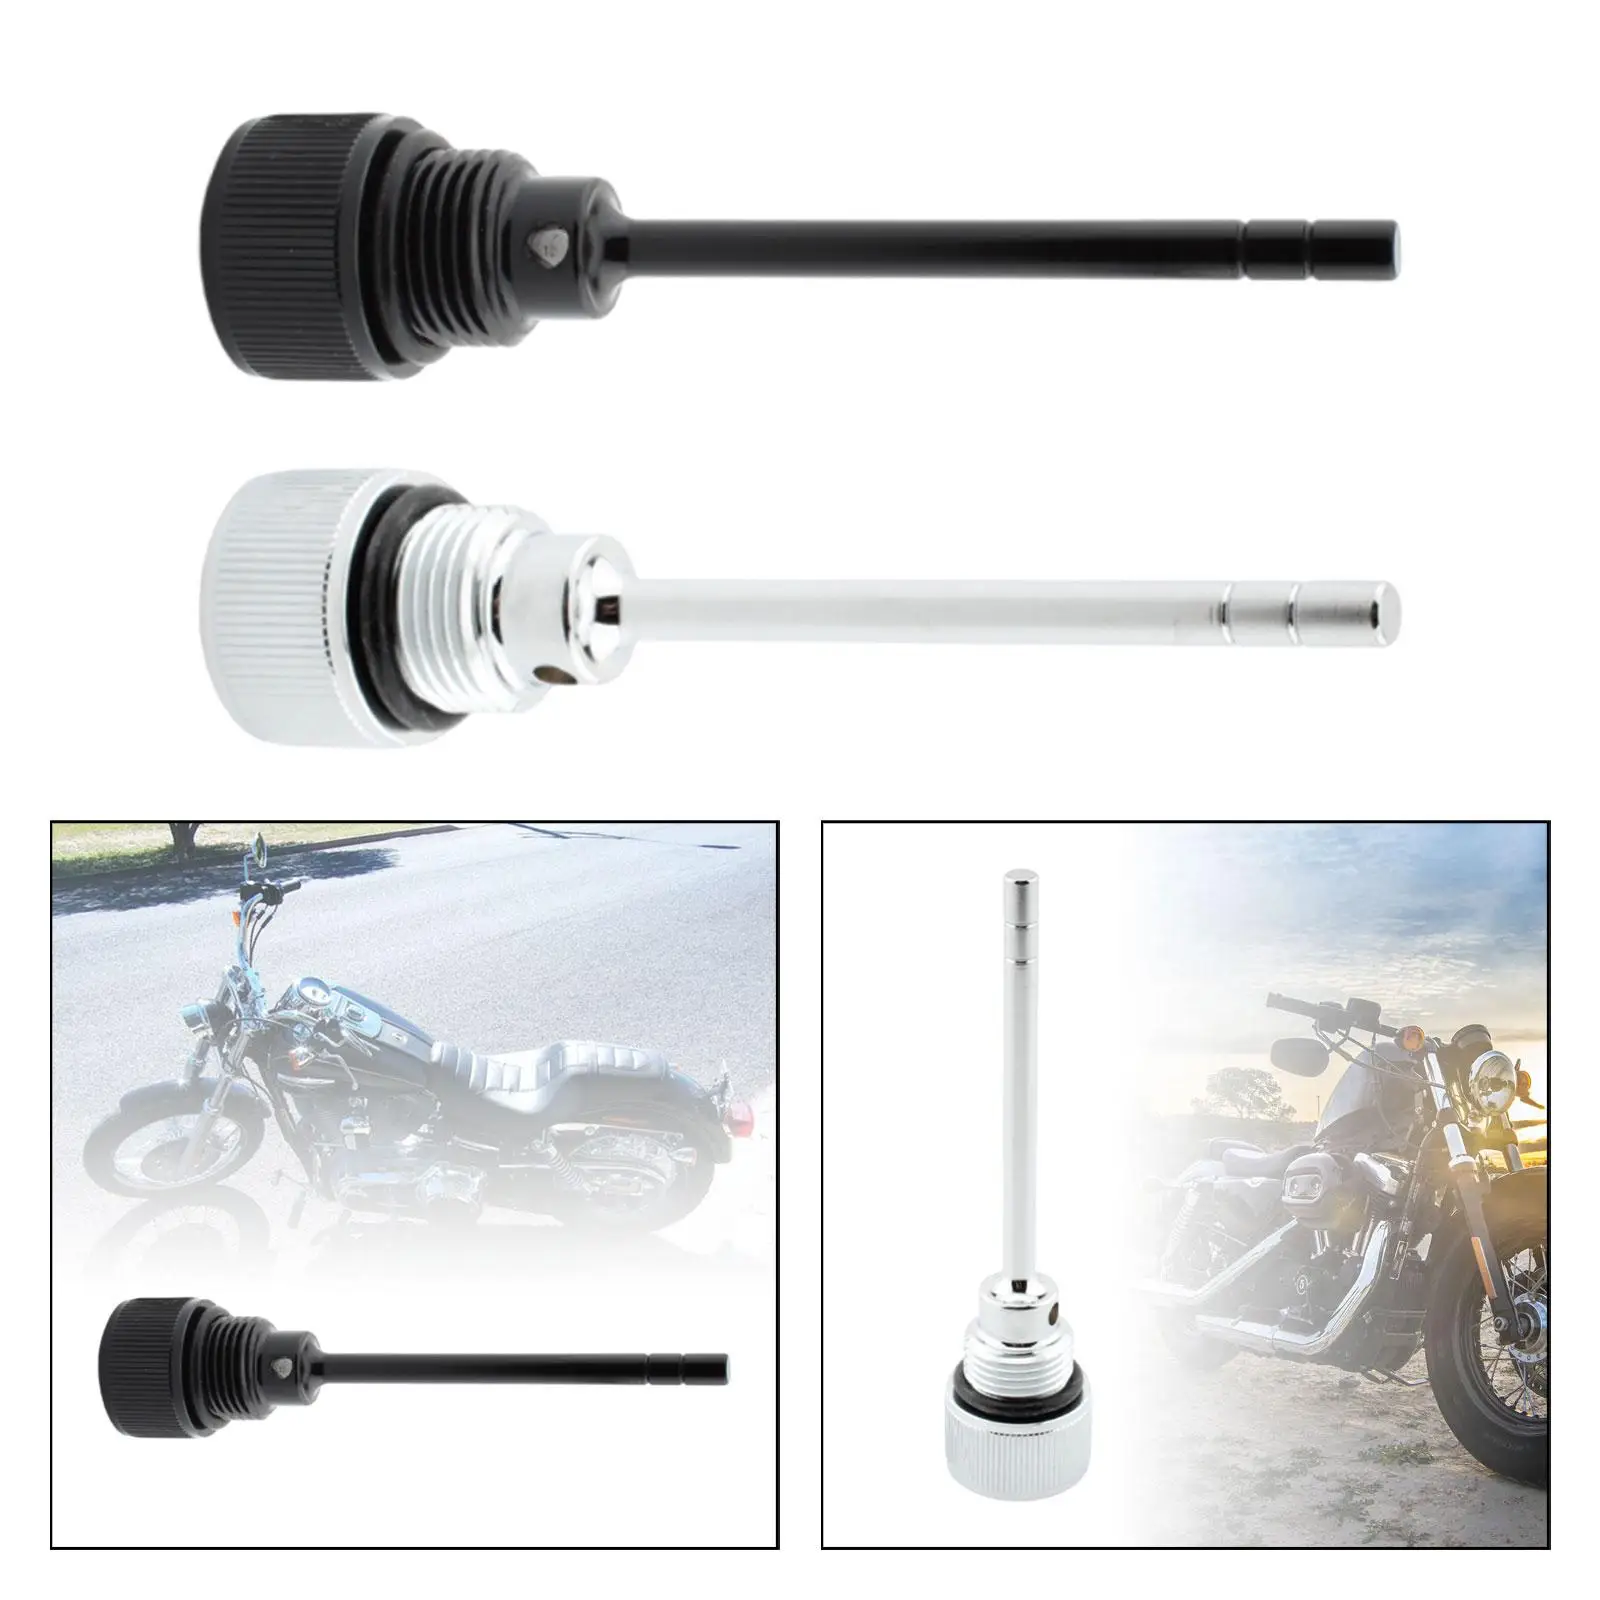 Transmission Oil Fill Plug Dipstick Durable Accessory for Fxs Flstfbs